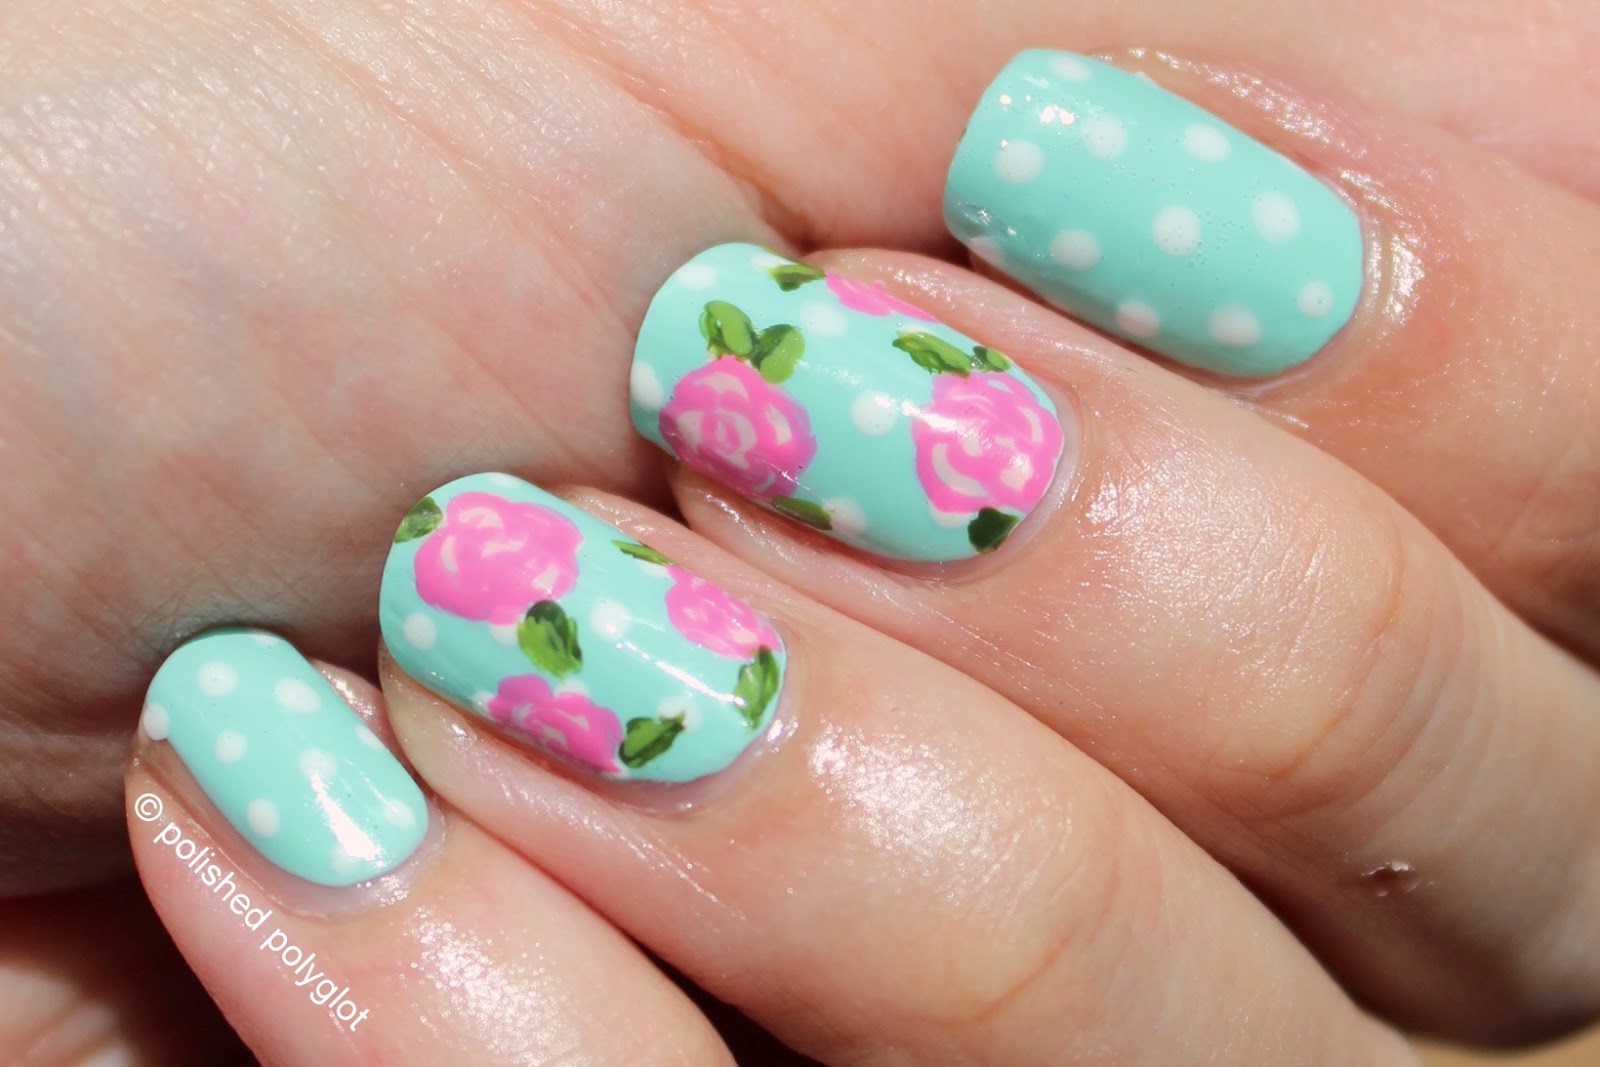 Guest Post Series: Faces of Spring (Nails Edition), Natalia from "Polished Polyglot"